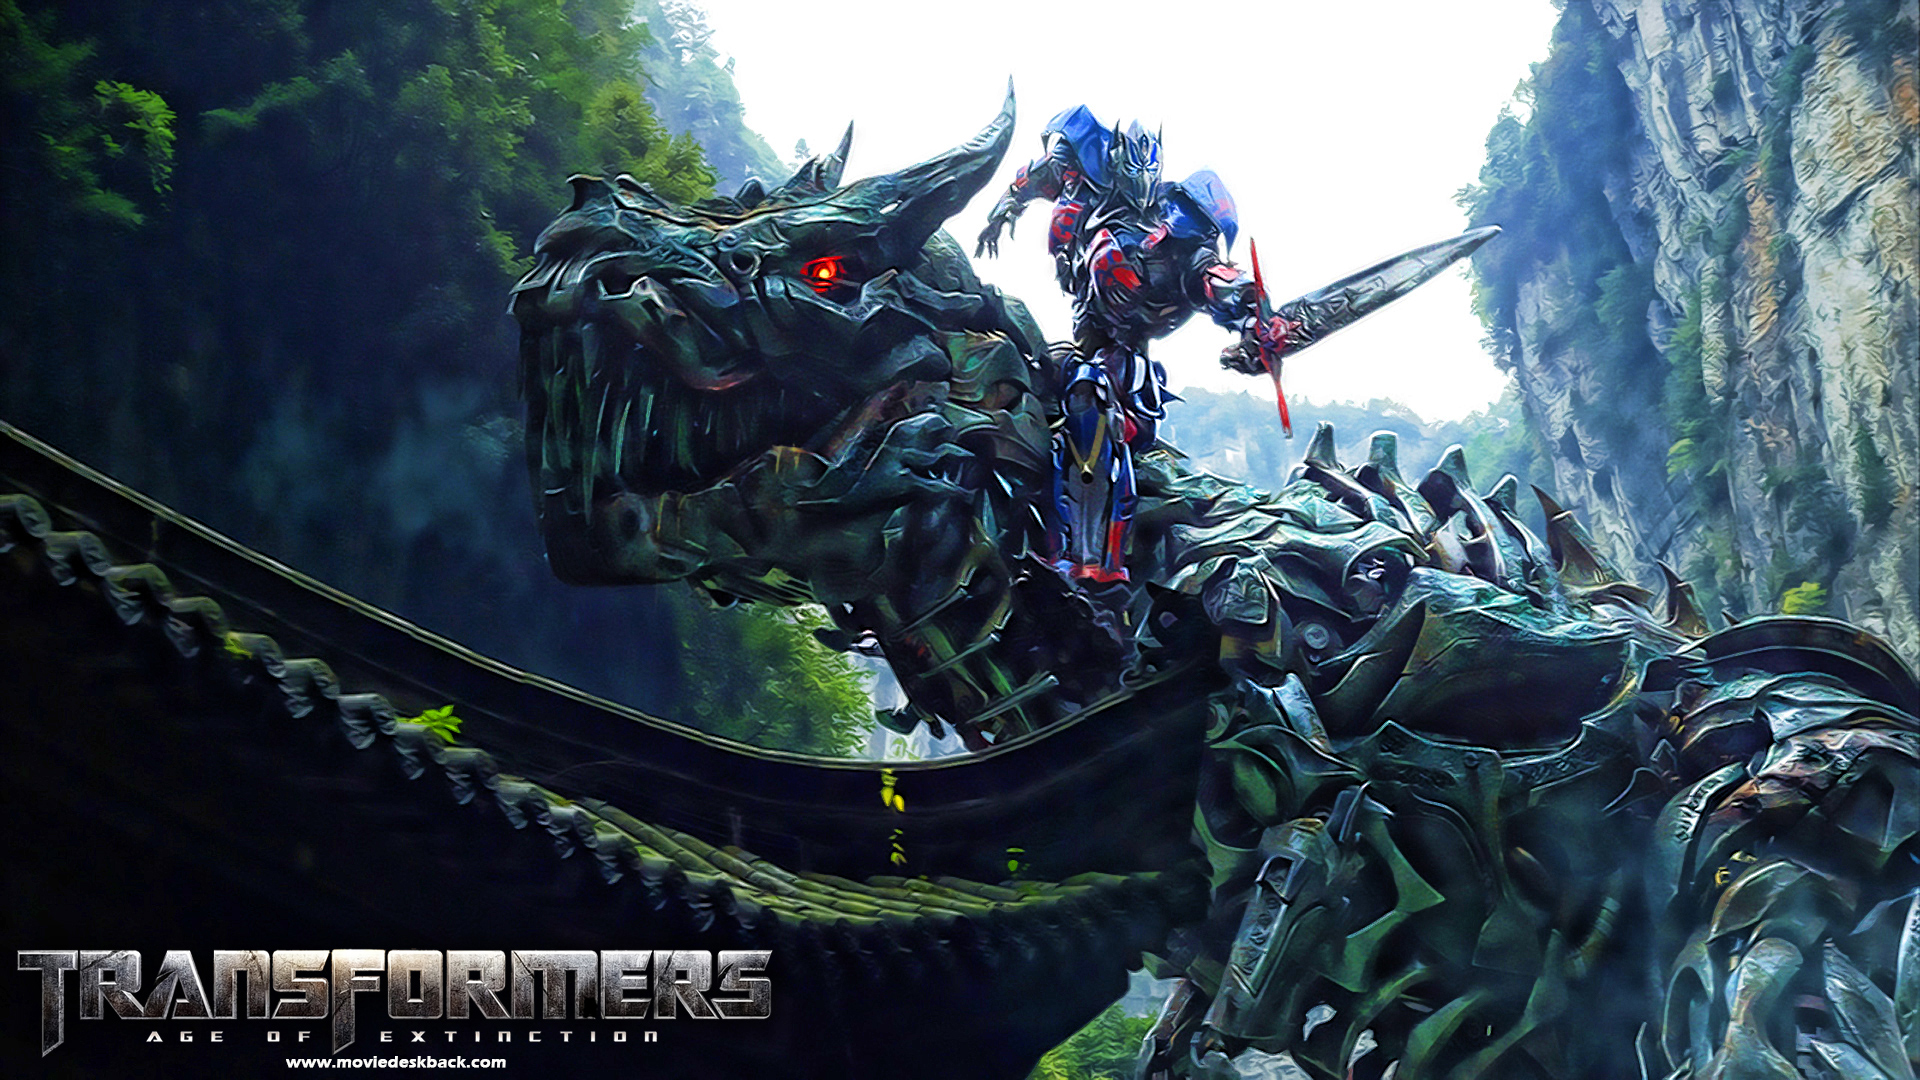  Transformers Age Of Extinction Is The Ultimate Transformers Movie